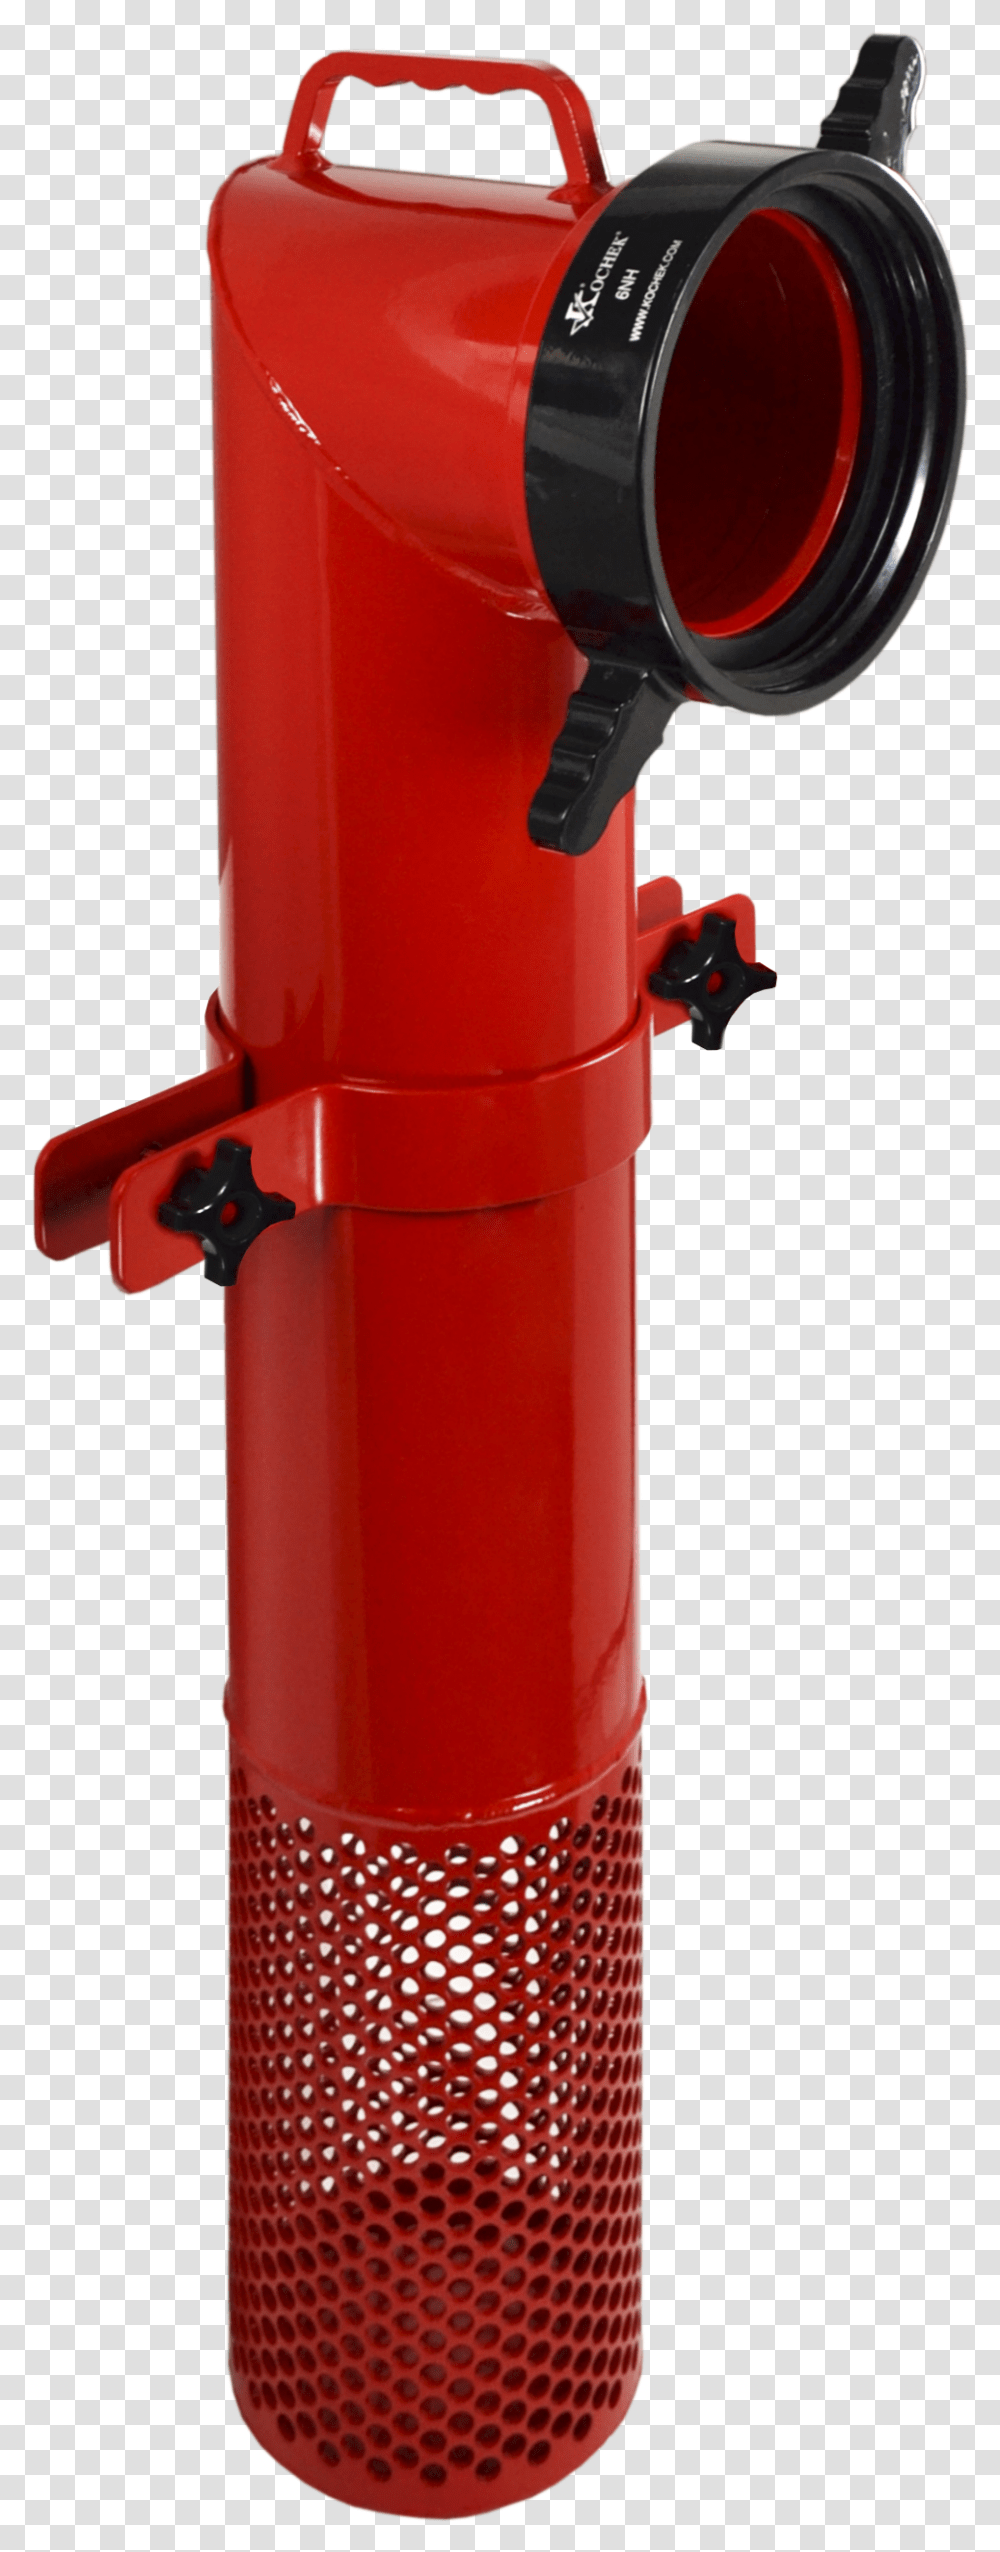 Nh Long Handle Ice Strainer Kochek Ice Strainer, Gas Pump, Machine, Hydrant, Fire Hydrant Transparent Png